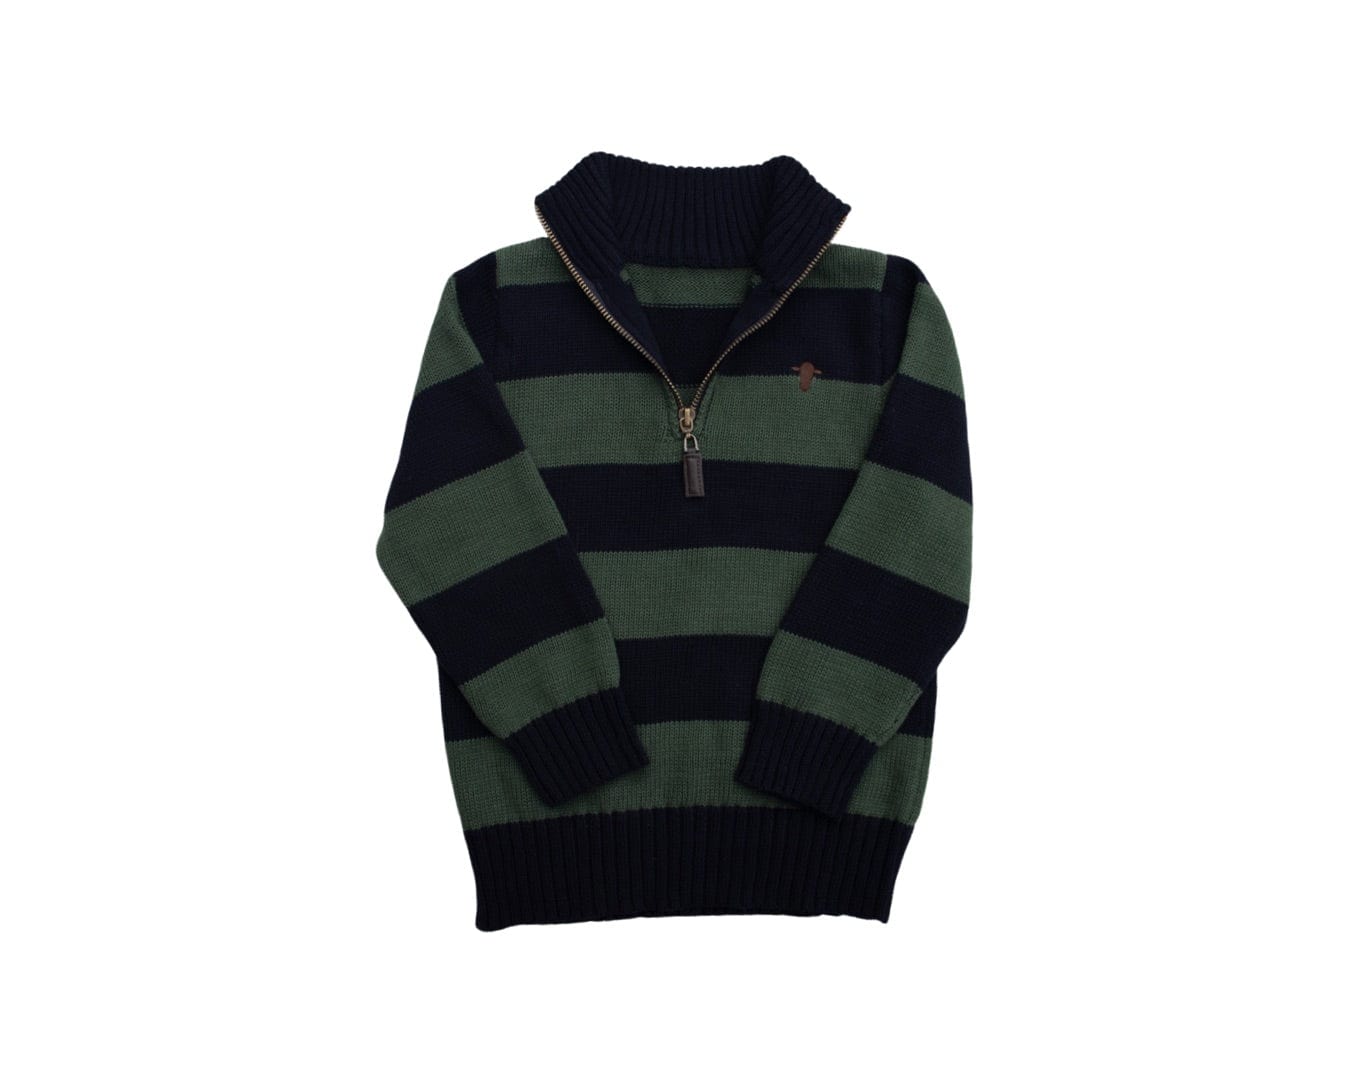 Charlie Knit Jumper- Now up to Size 10